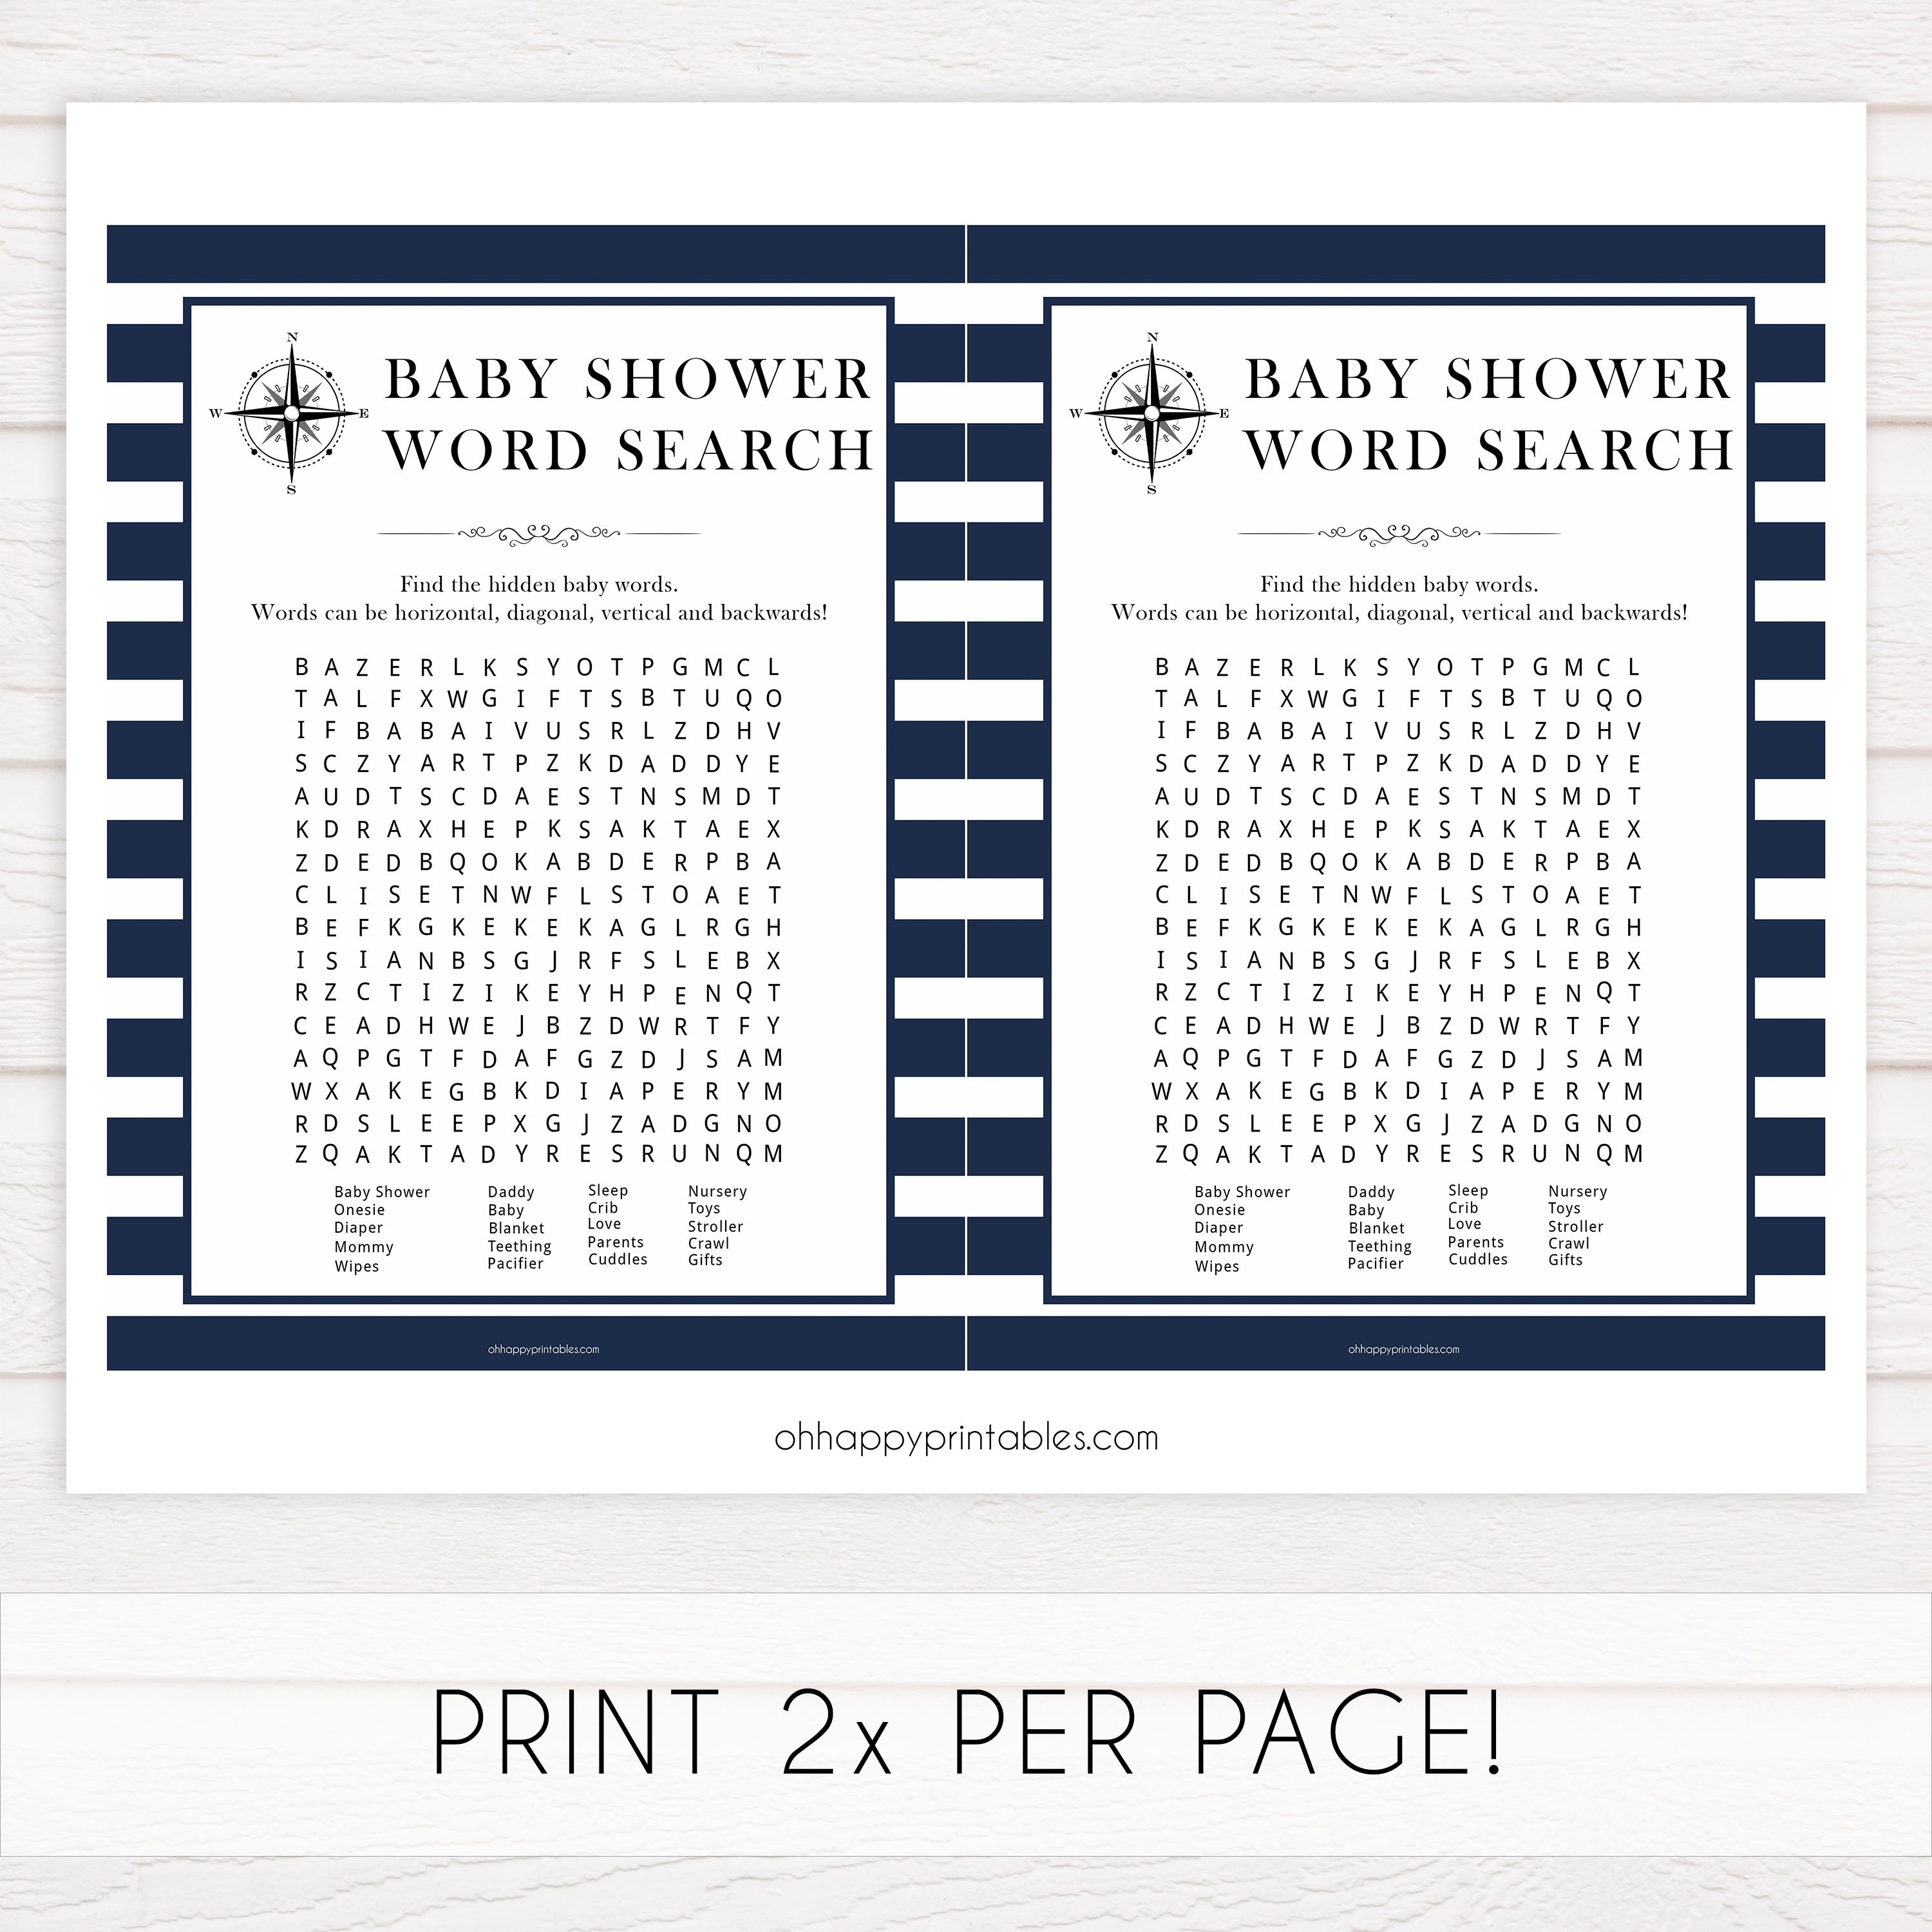 baby shower word search game, baby word search game, Printable baby shower games, nautical baby shower games, nautical baby games, fun baby shower games, top baby shower ideas